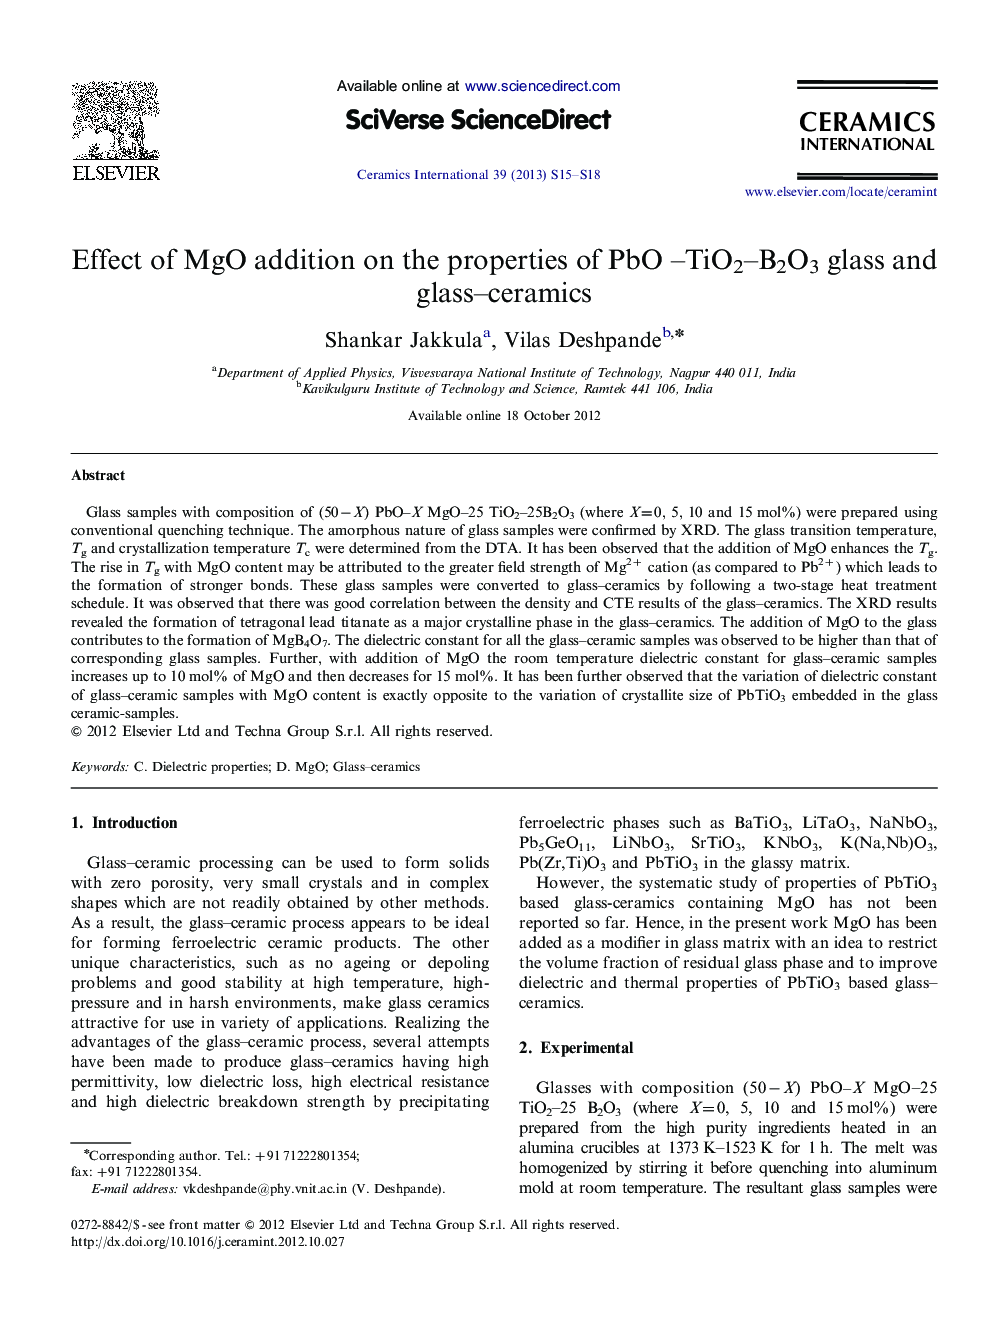 Effect of MgO addition on the properties of PbO –TiO2–B2O3 glass and glass–ceramics